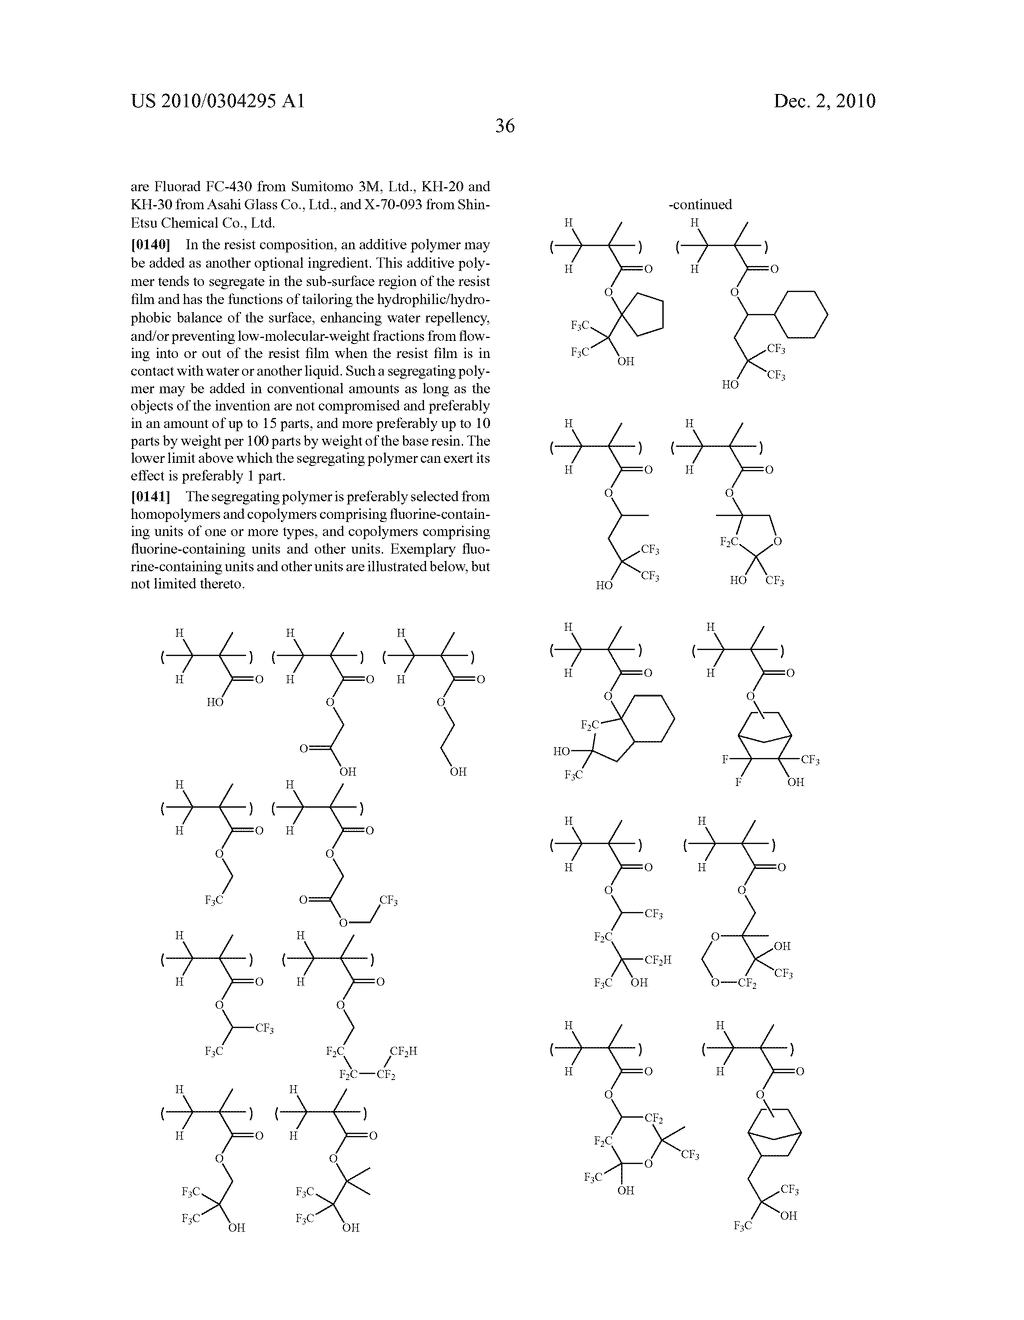 ACID-LABILE ESTER MONOMER HAVING SPIROCYCLIC STRUCTURE, POLYMER, RESIST COMPOSITION, AND PATTERNING PROCESS - diagram, schematic, and image 37